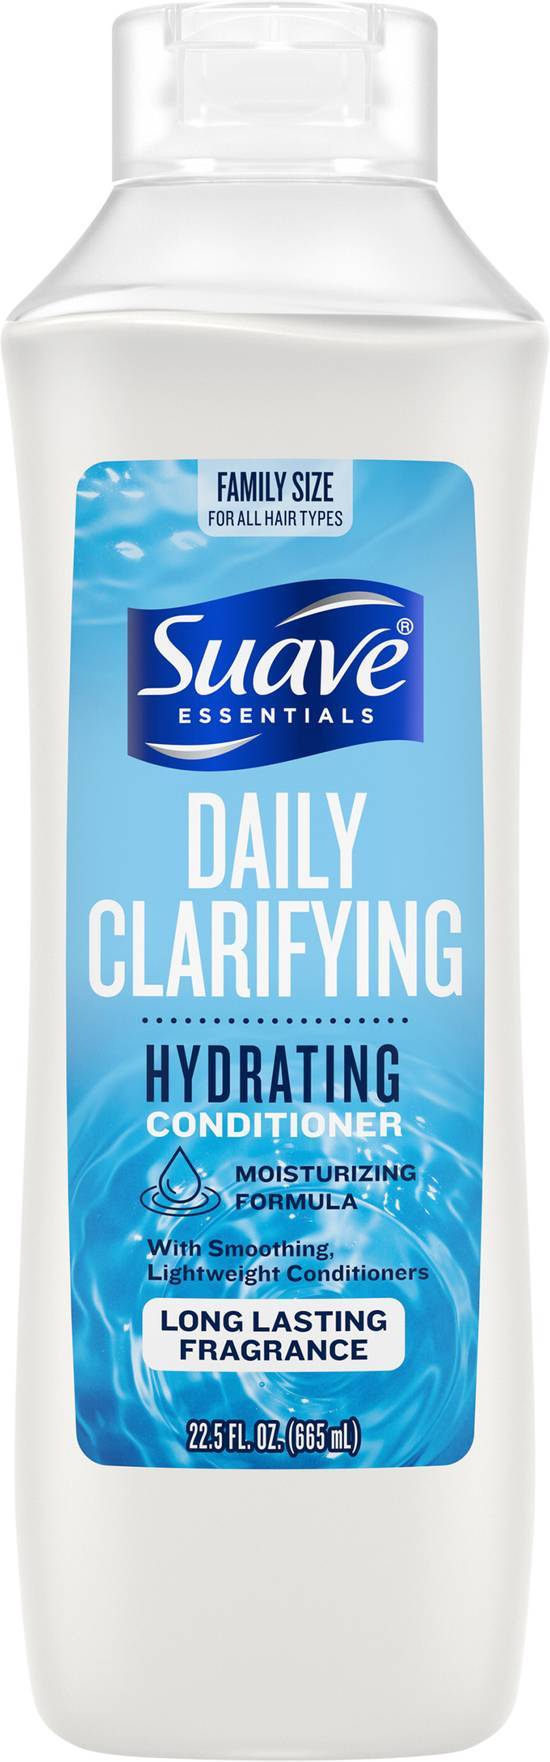 Suave Essentials Daily Clarifying Cleansing Conditioner